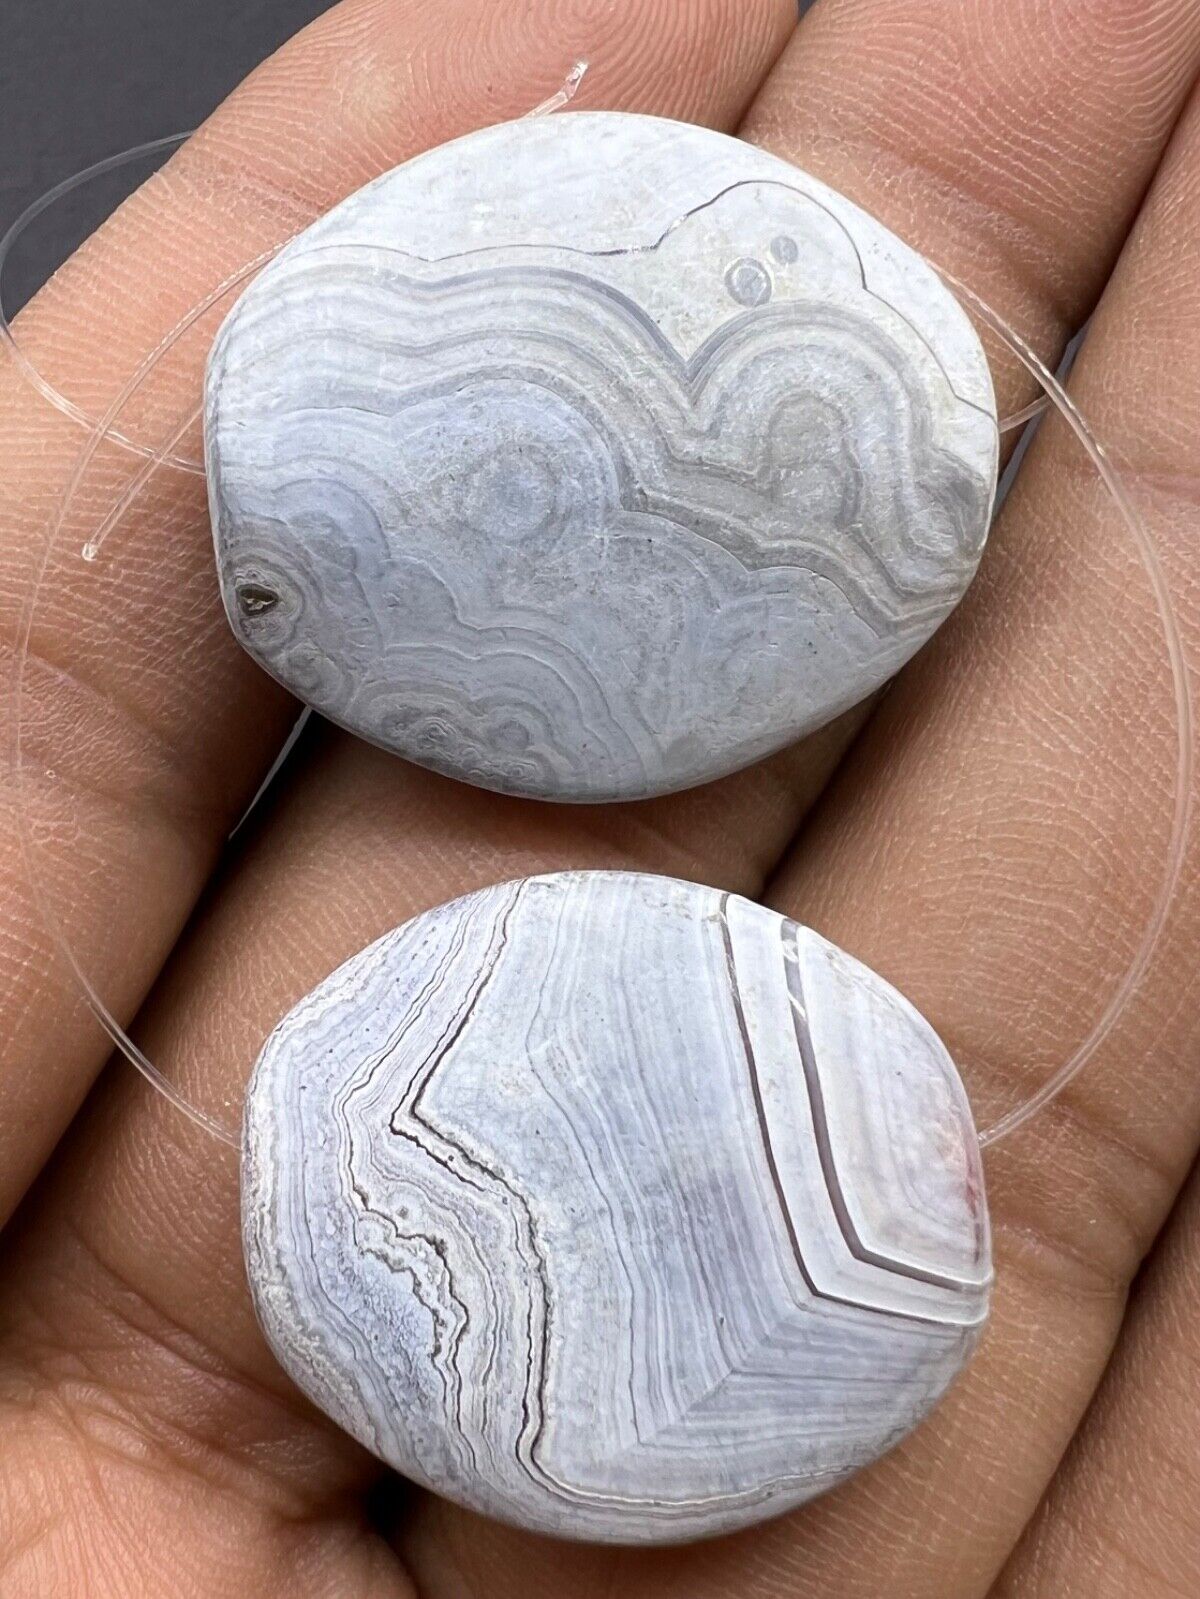 Sale 2 Pair Of Natural Lace agate Cabochons, Loose Stone, Crazy Lace In Oval Sha